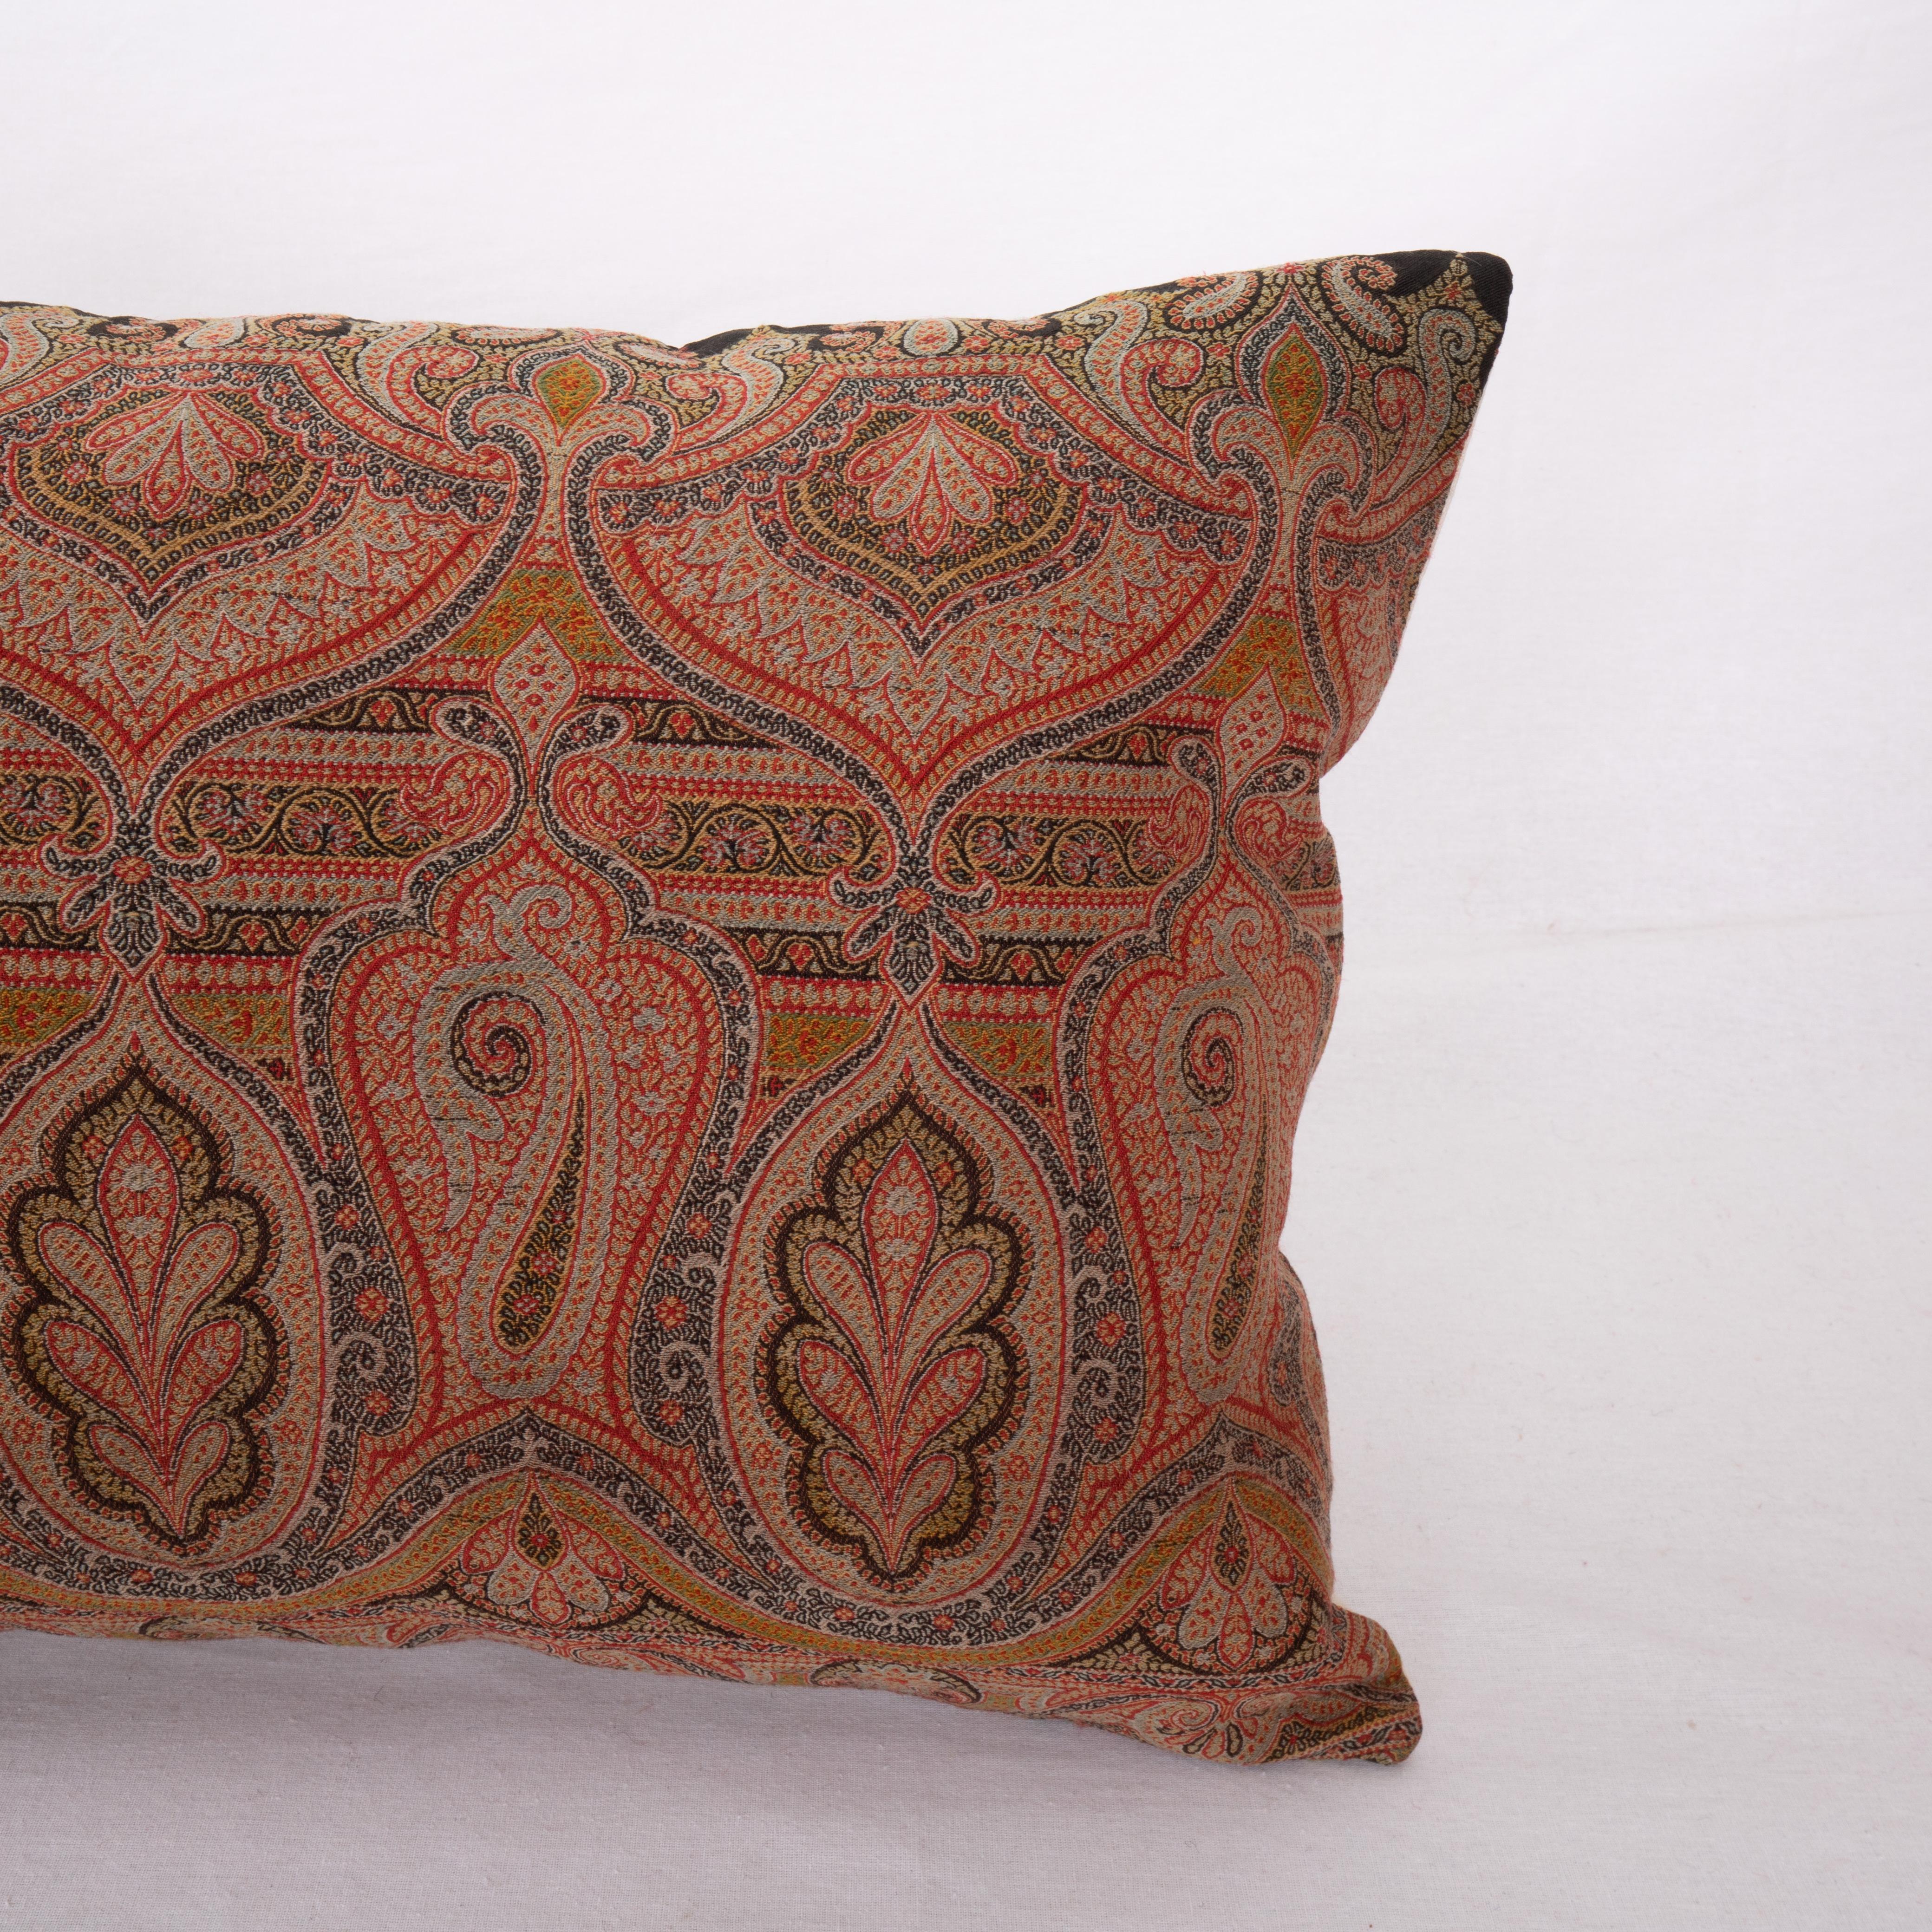 Woven Antique Pillow Cover Made from a European Wool Paisley Shawl, L 19th/ E.20th